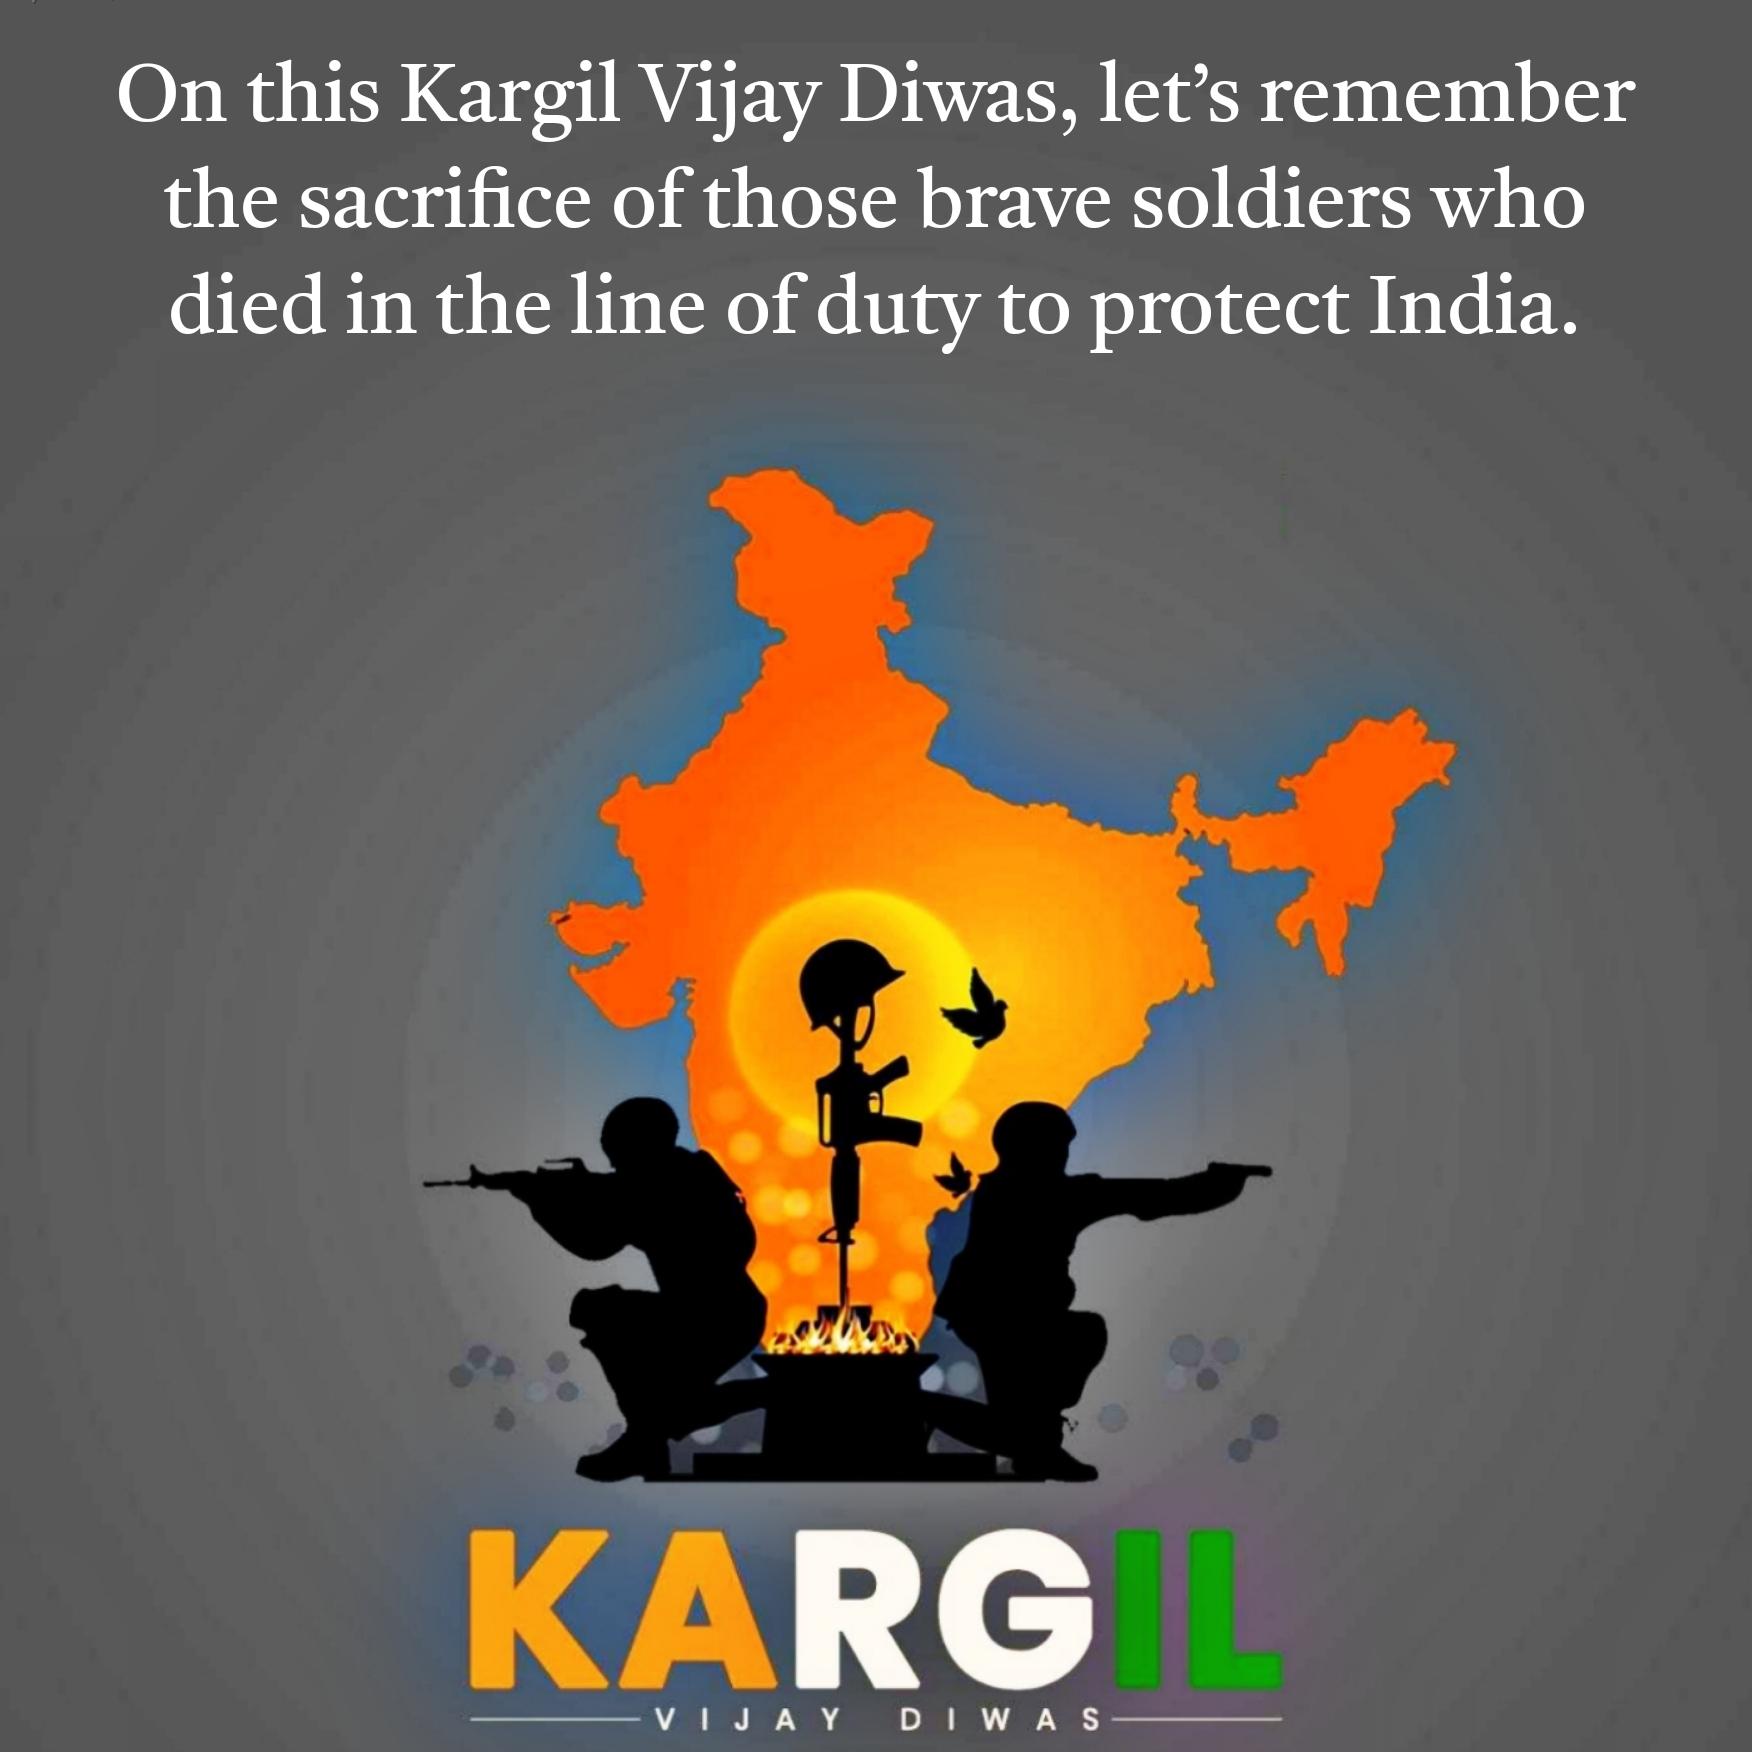 On this Kargil Vijay Diwas lets remember the sacrifice of those brave soldiers